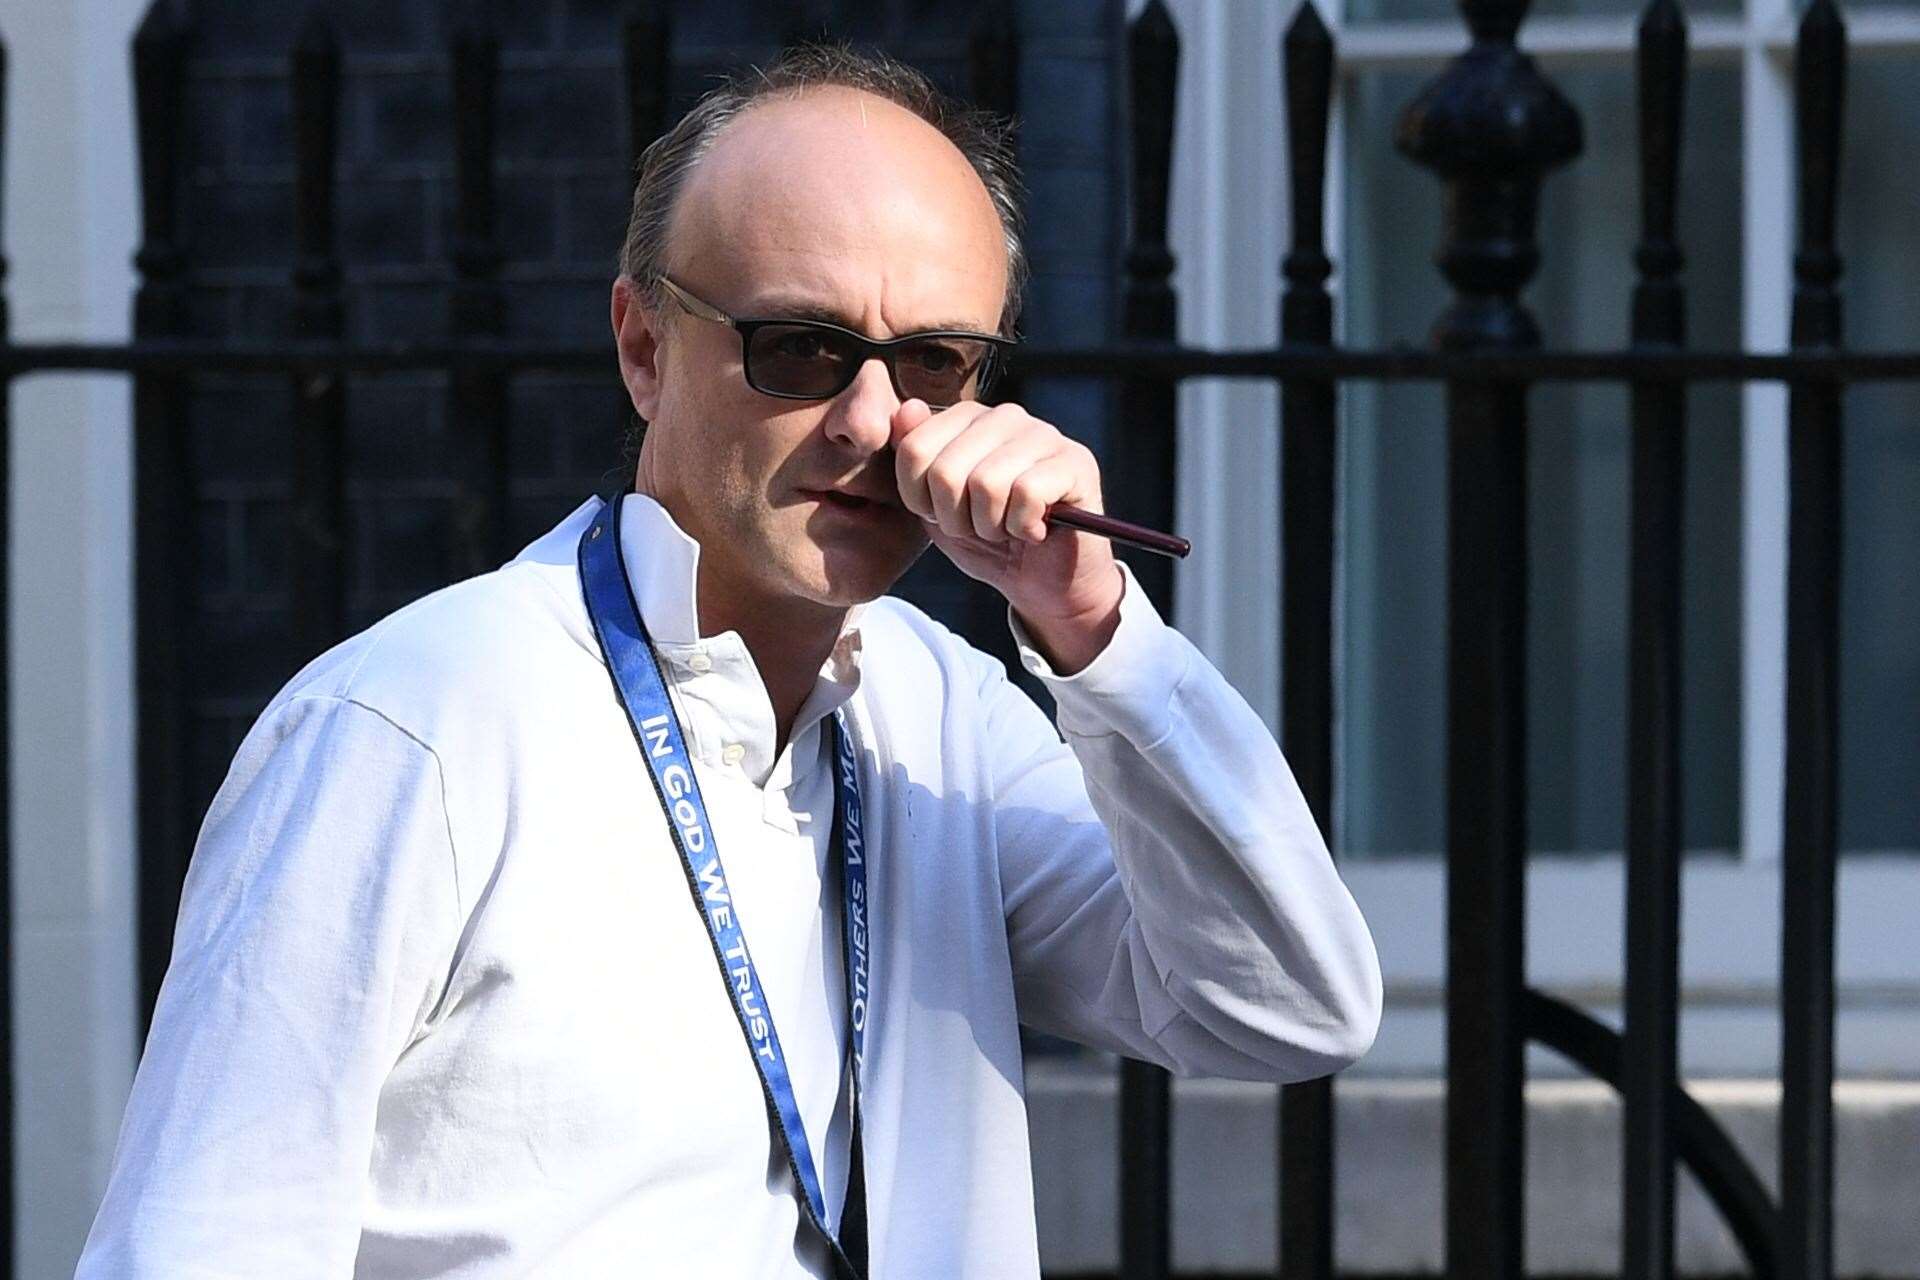 Dominic Cummings is said to have been a prime mover in the overhaul of the civil service (Stefan Rousseau/PA)